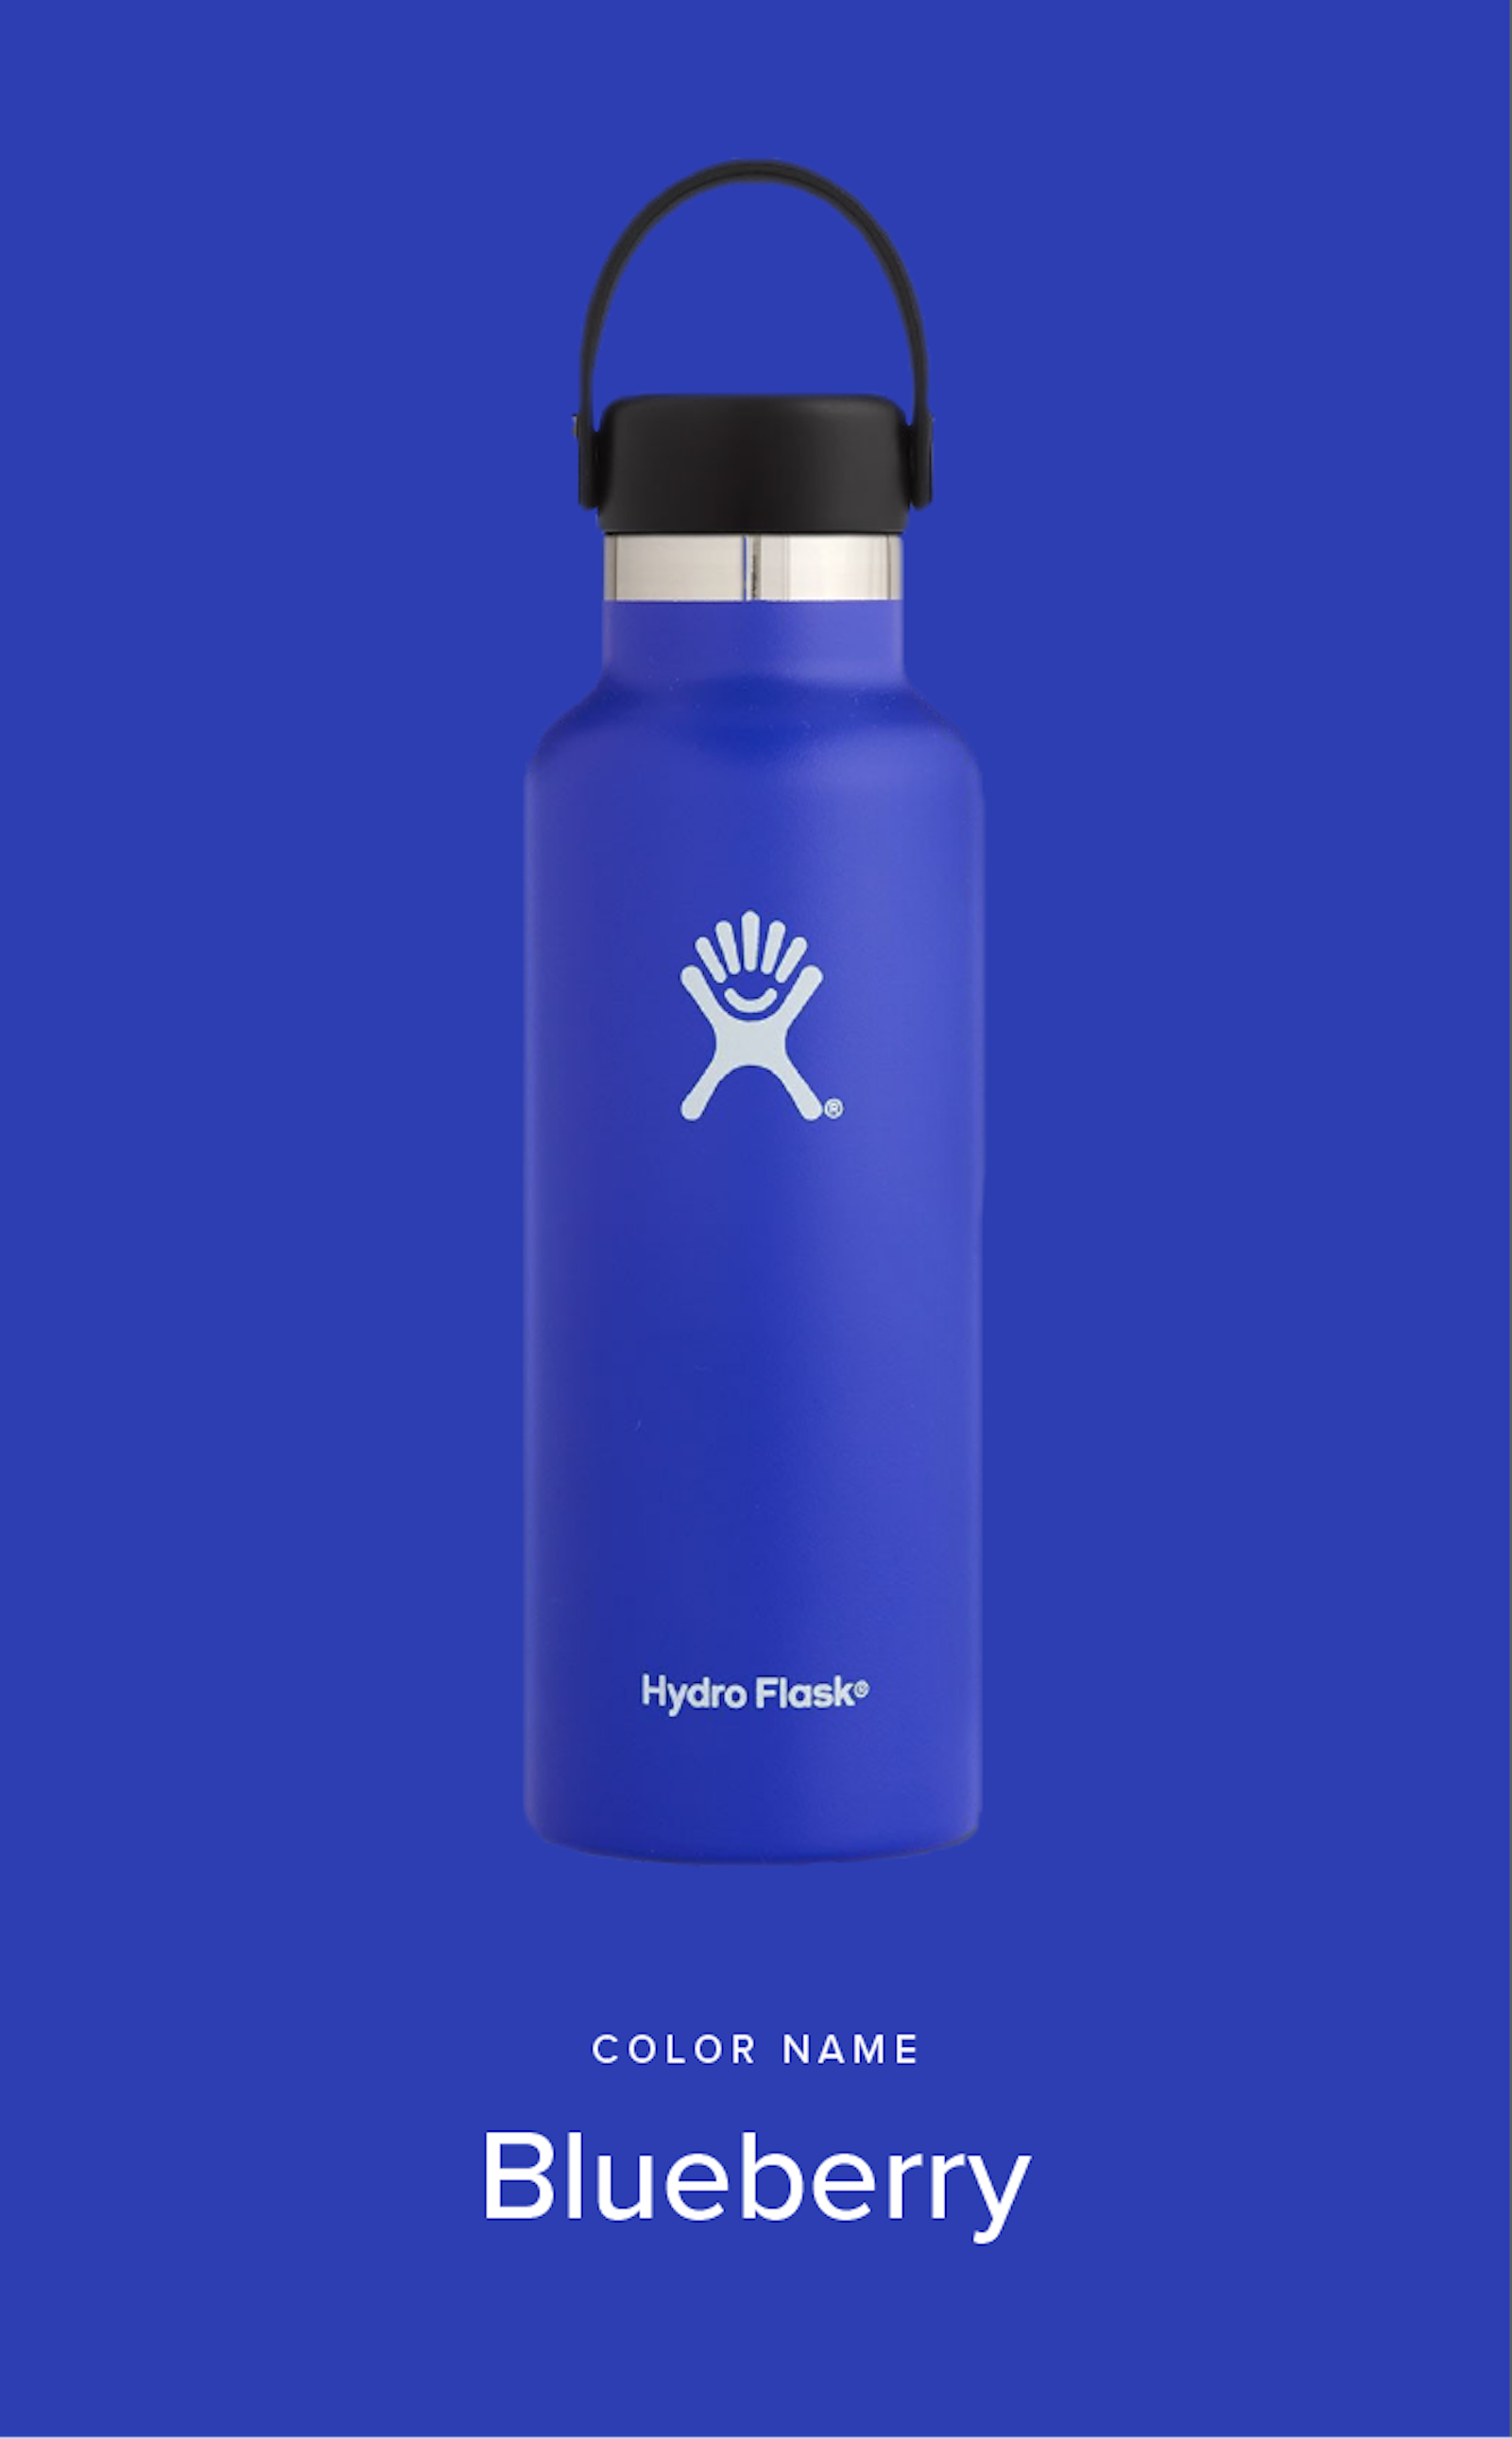 The Hydro Flask brand design of the Blueberry flask on a blue background.